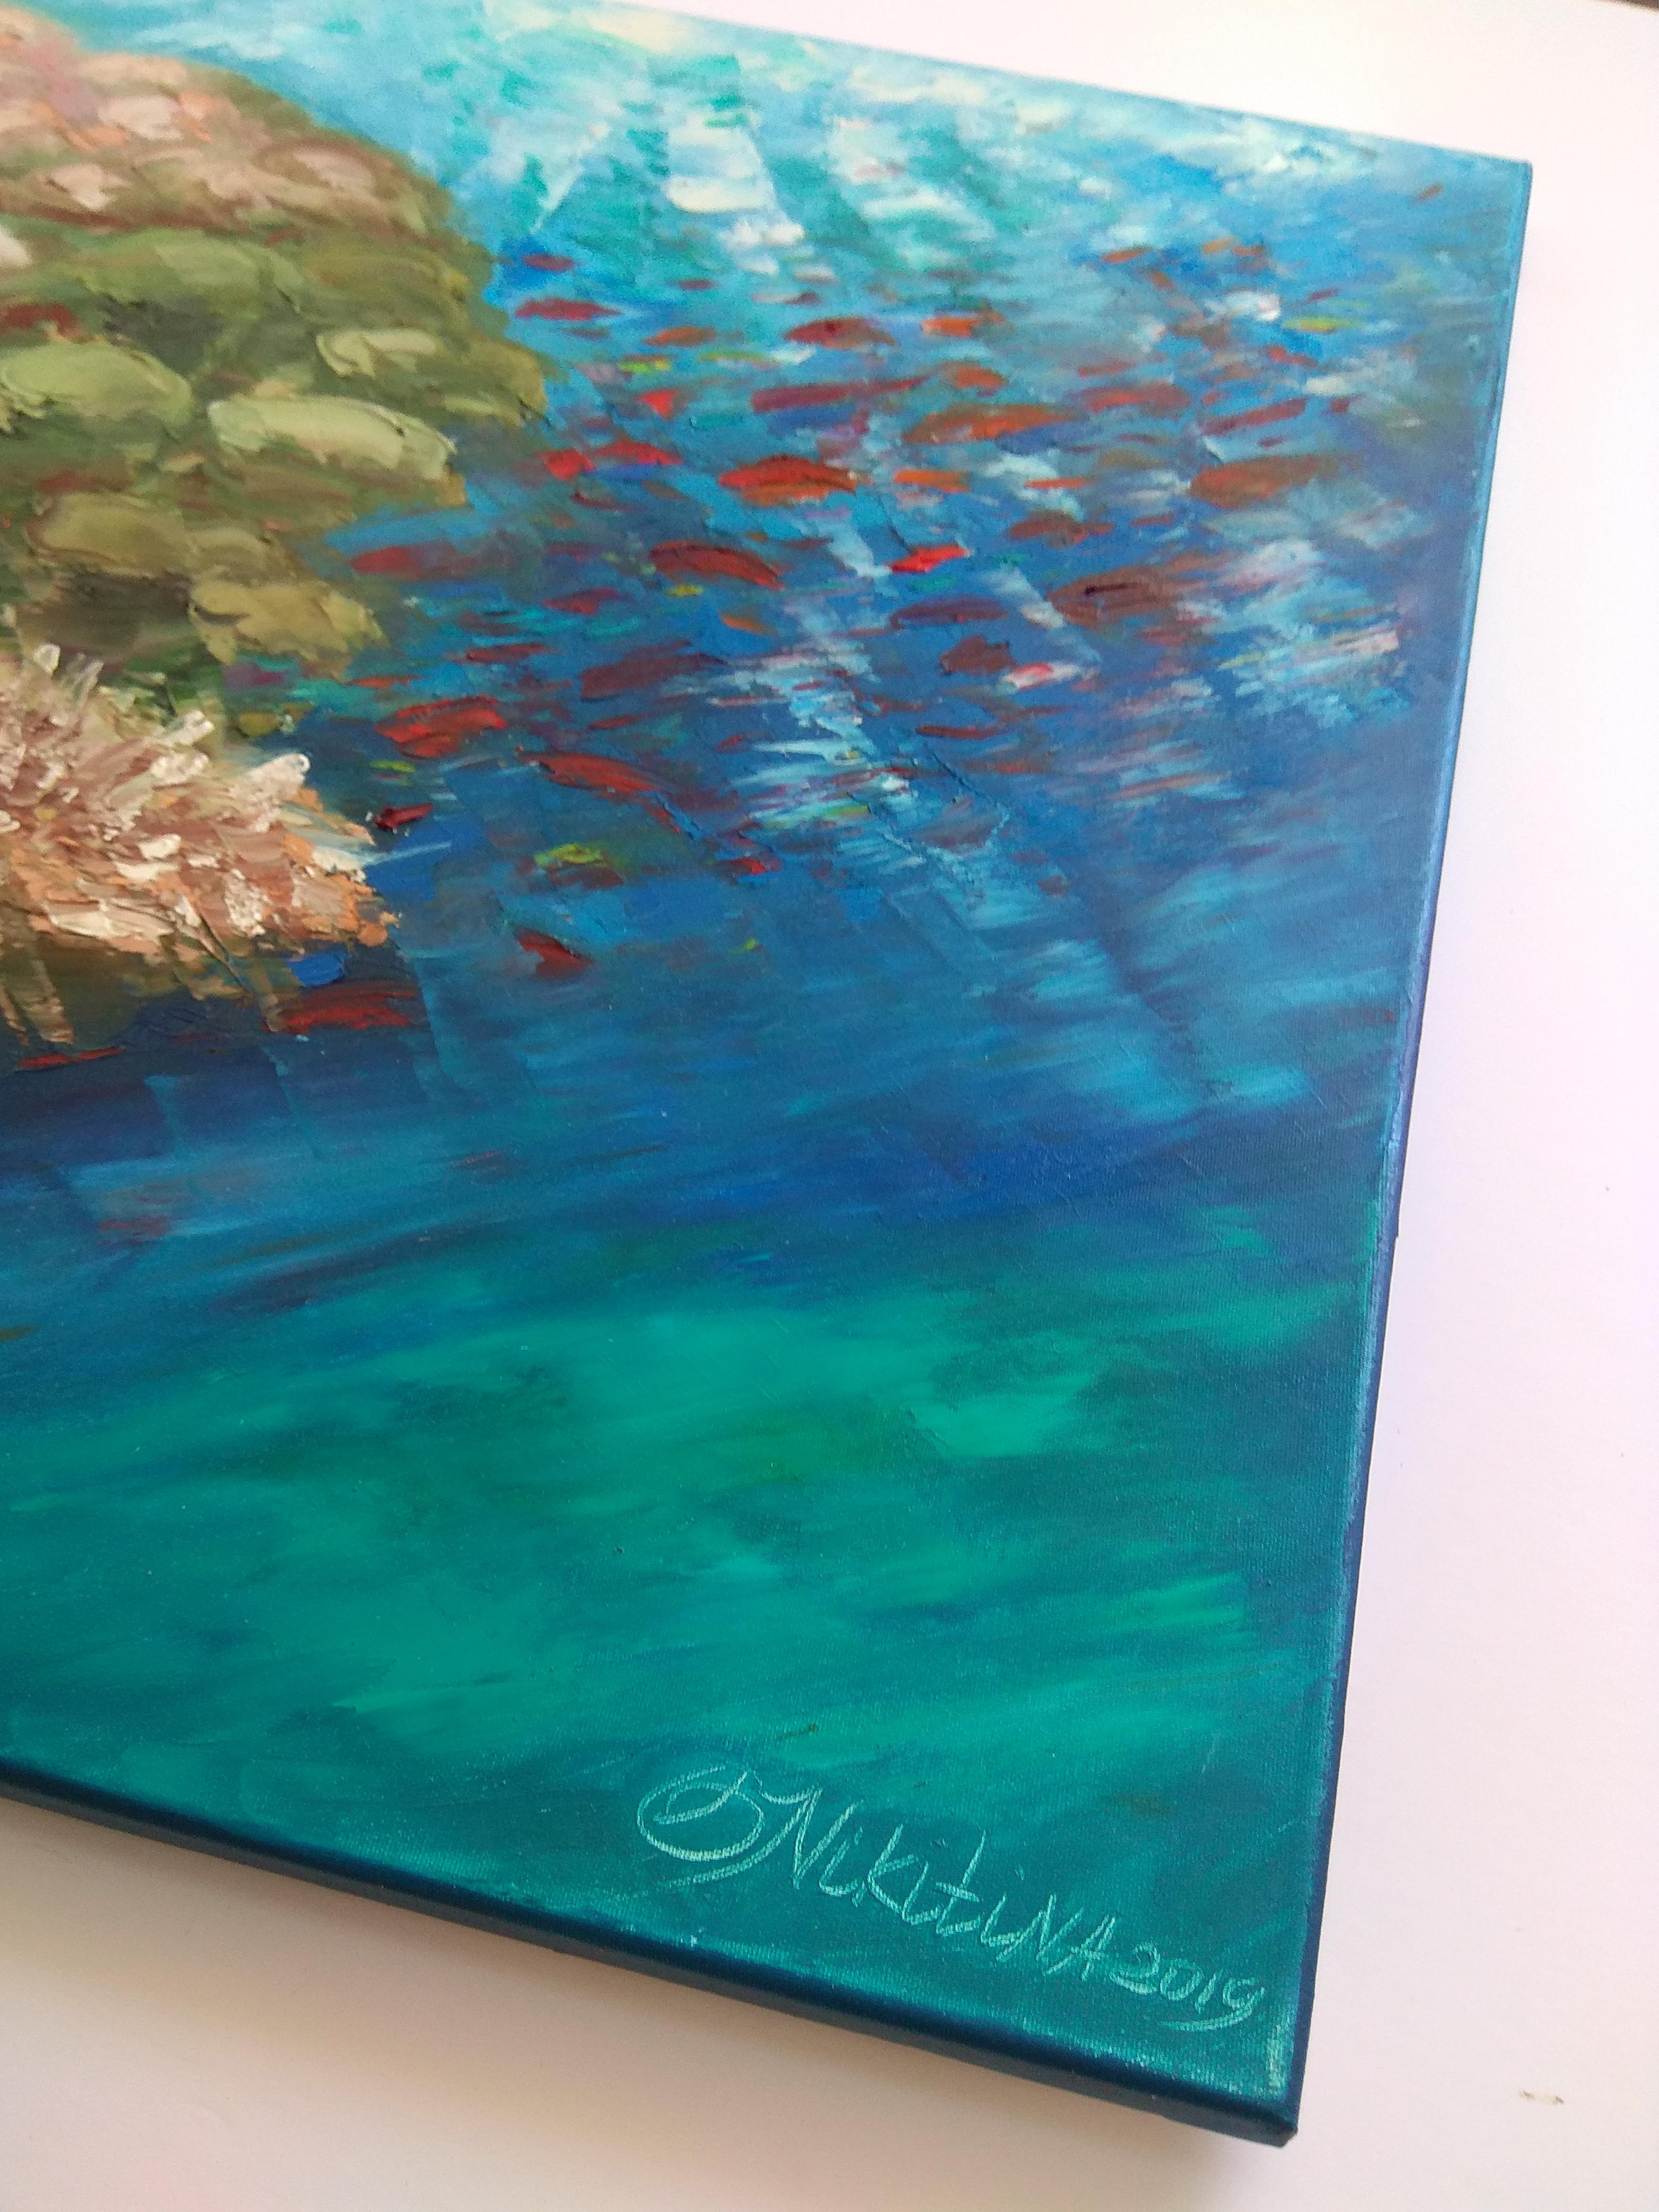 Tropical Coral Reef Underwater painting was made underwater at the depth of 8 m - Painting by Olga Nikitina